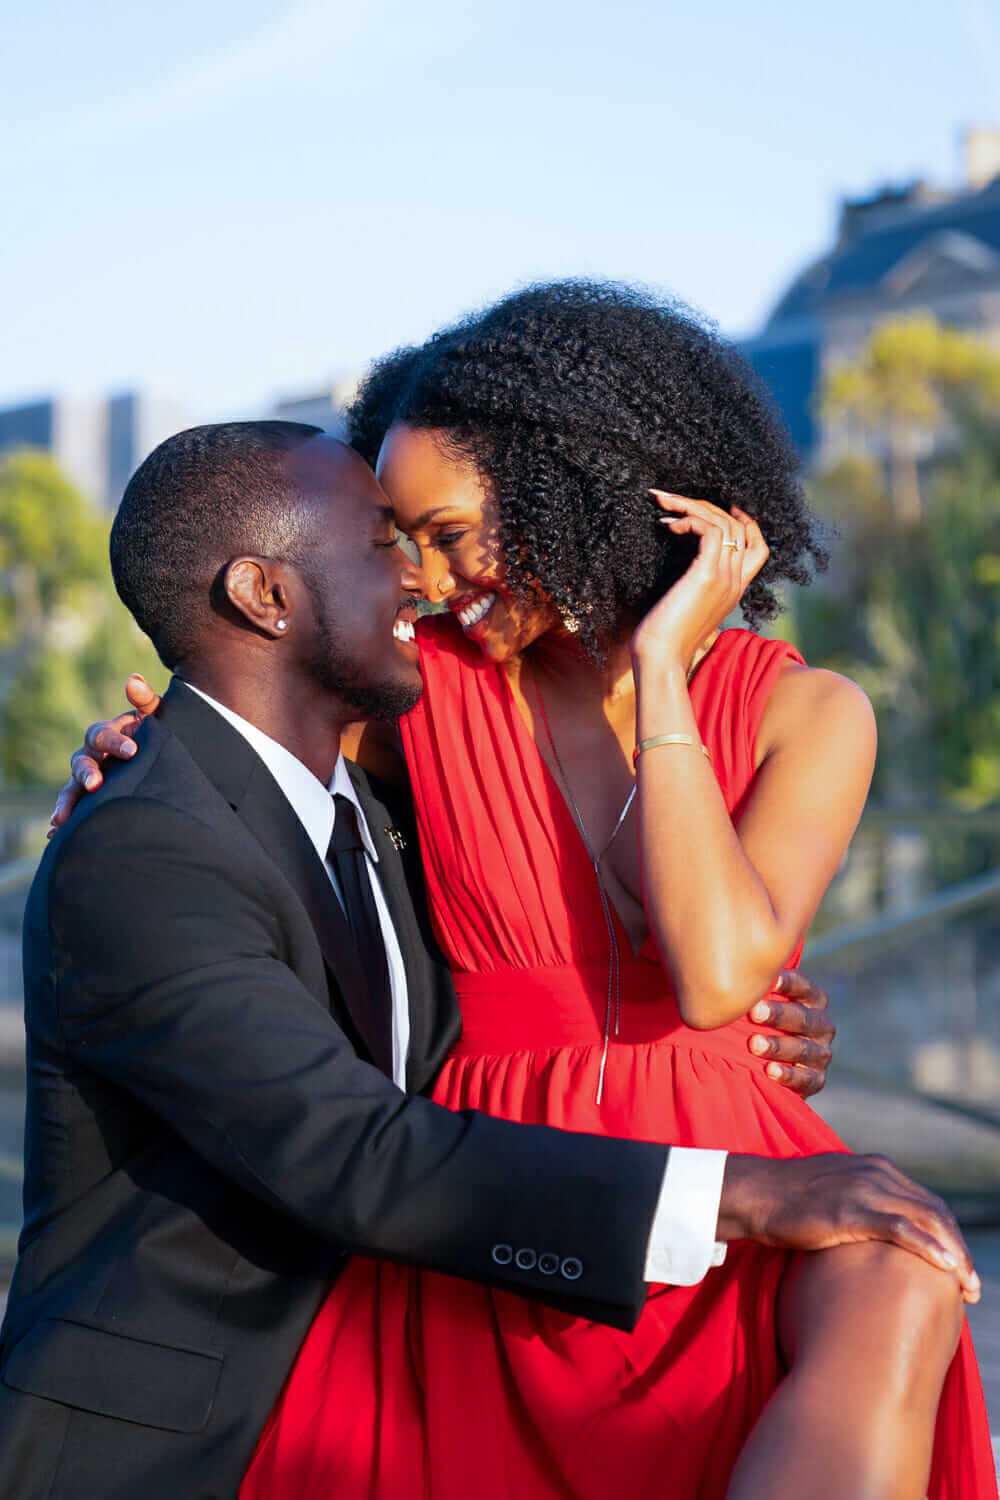 50 Romantic Couple Poses to Get Cute Couple Photos (+5 FREEBIES)